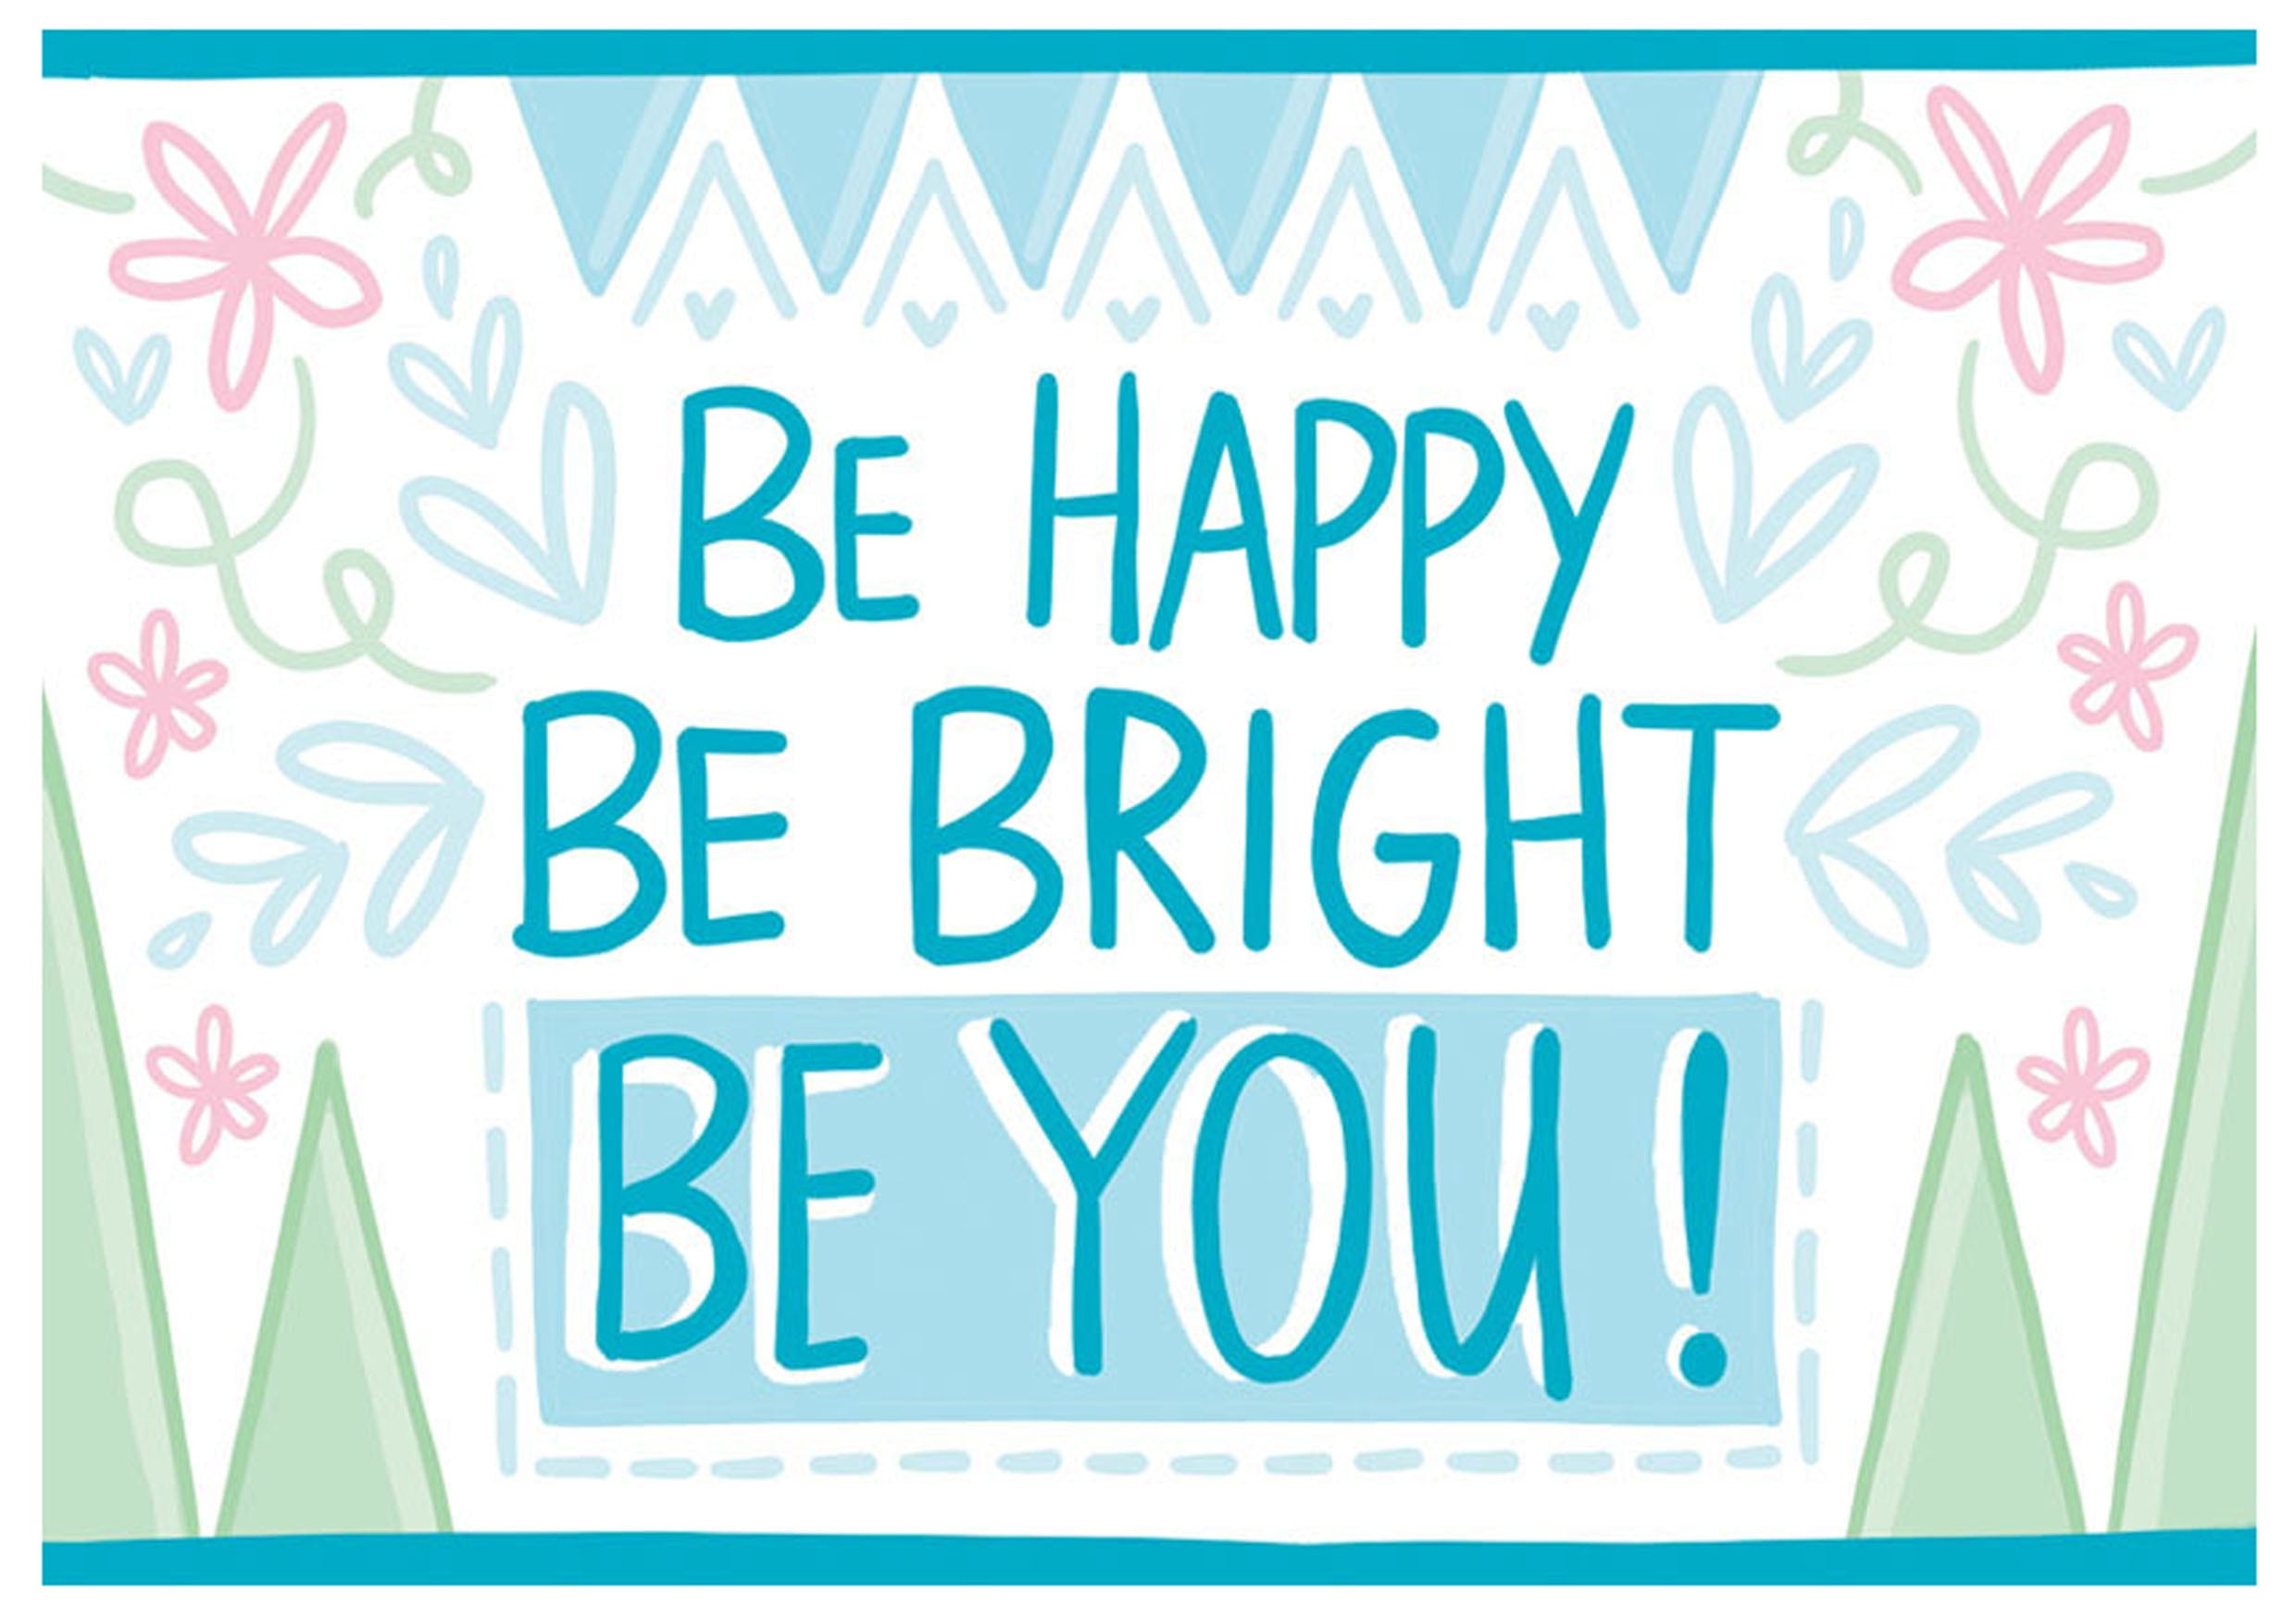 Royalty-Free photo: Be Happy Be Bright Be You wallpaper